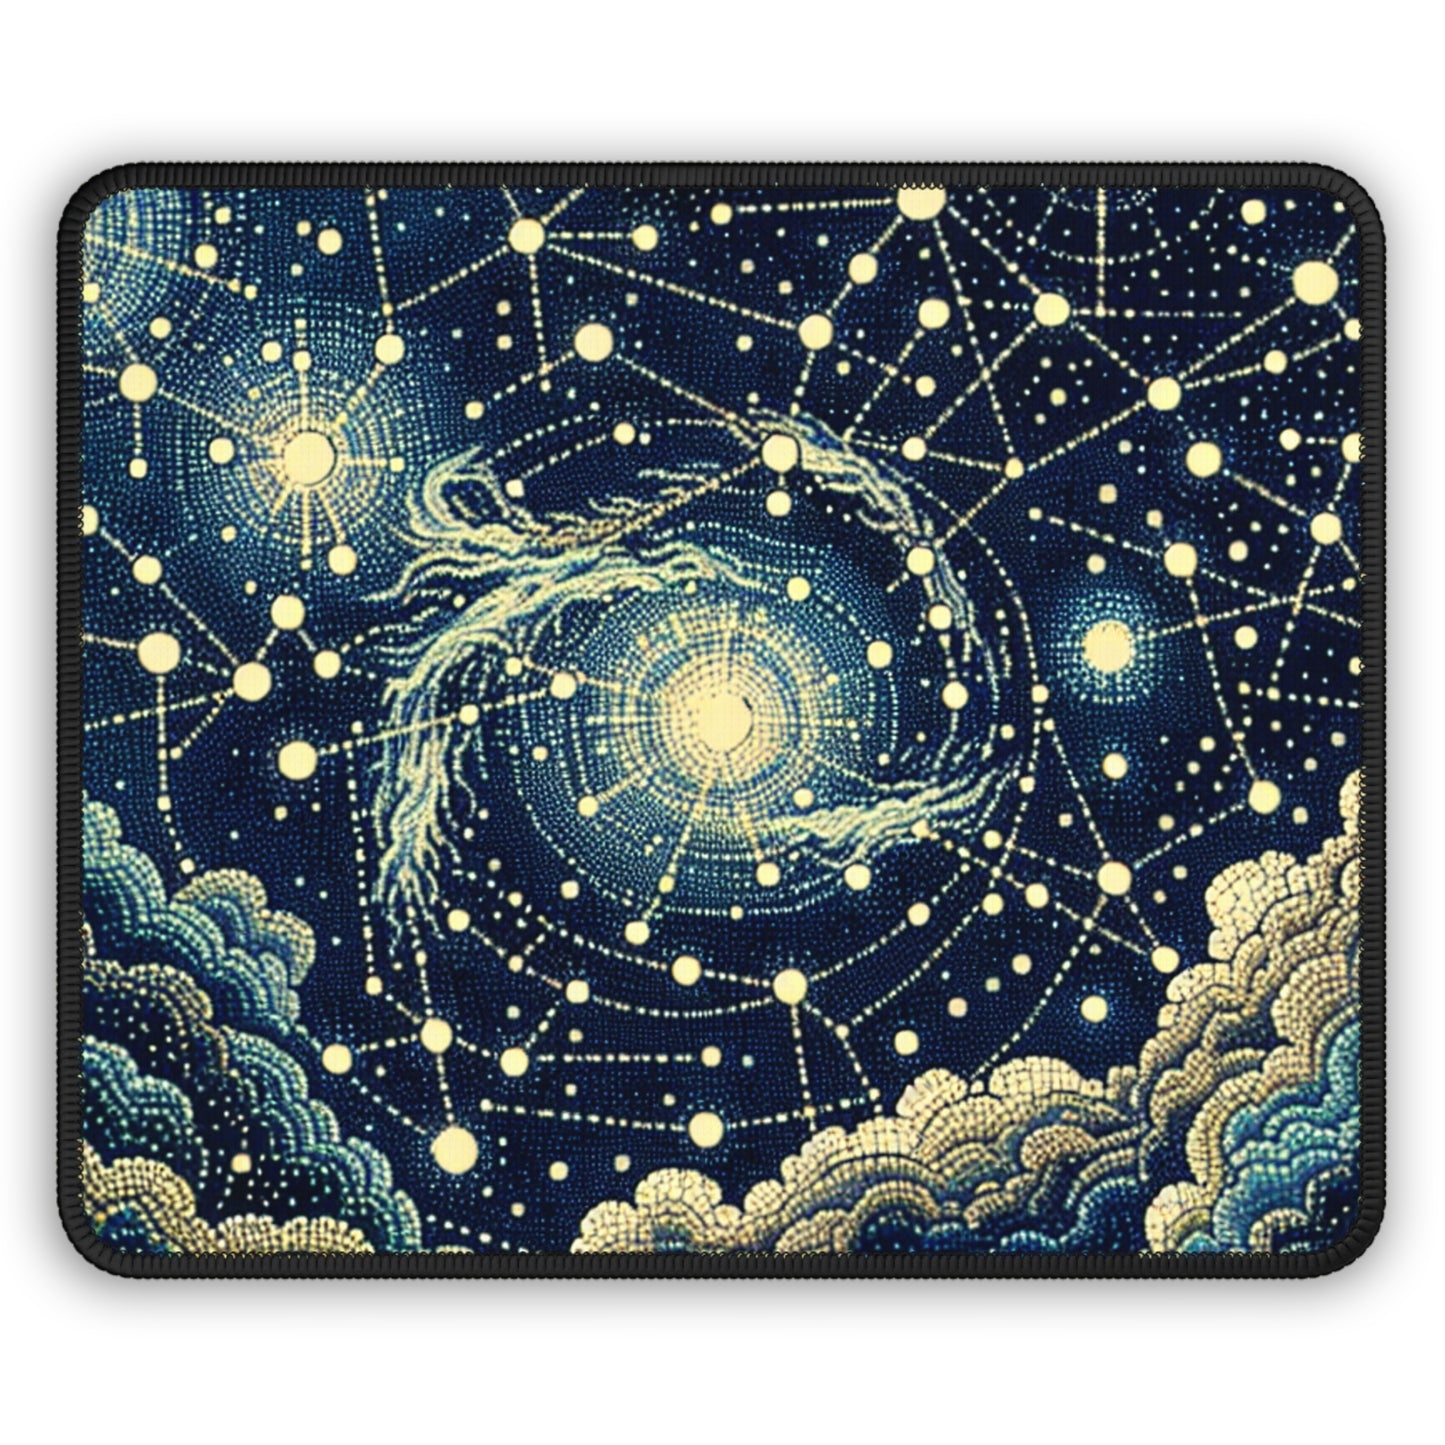 "Dotting the Heavens" - The Alien Gaming Mouse Pad Pointillism Style